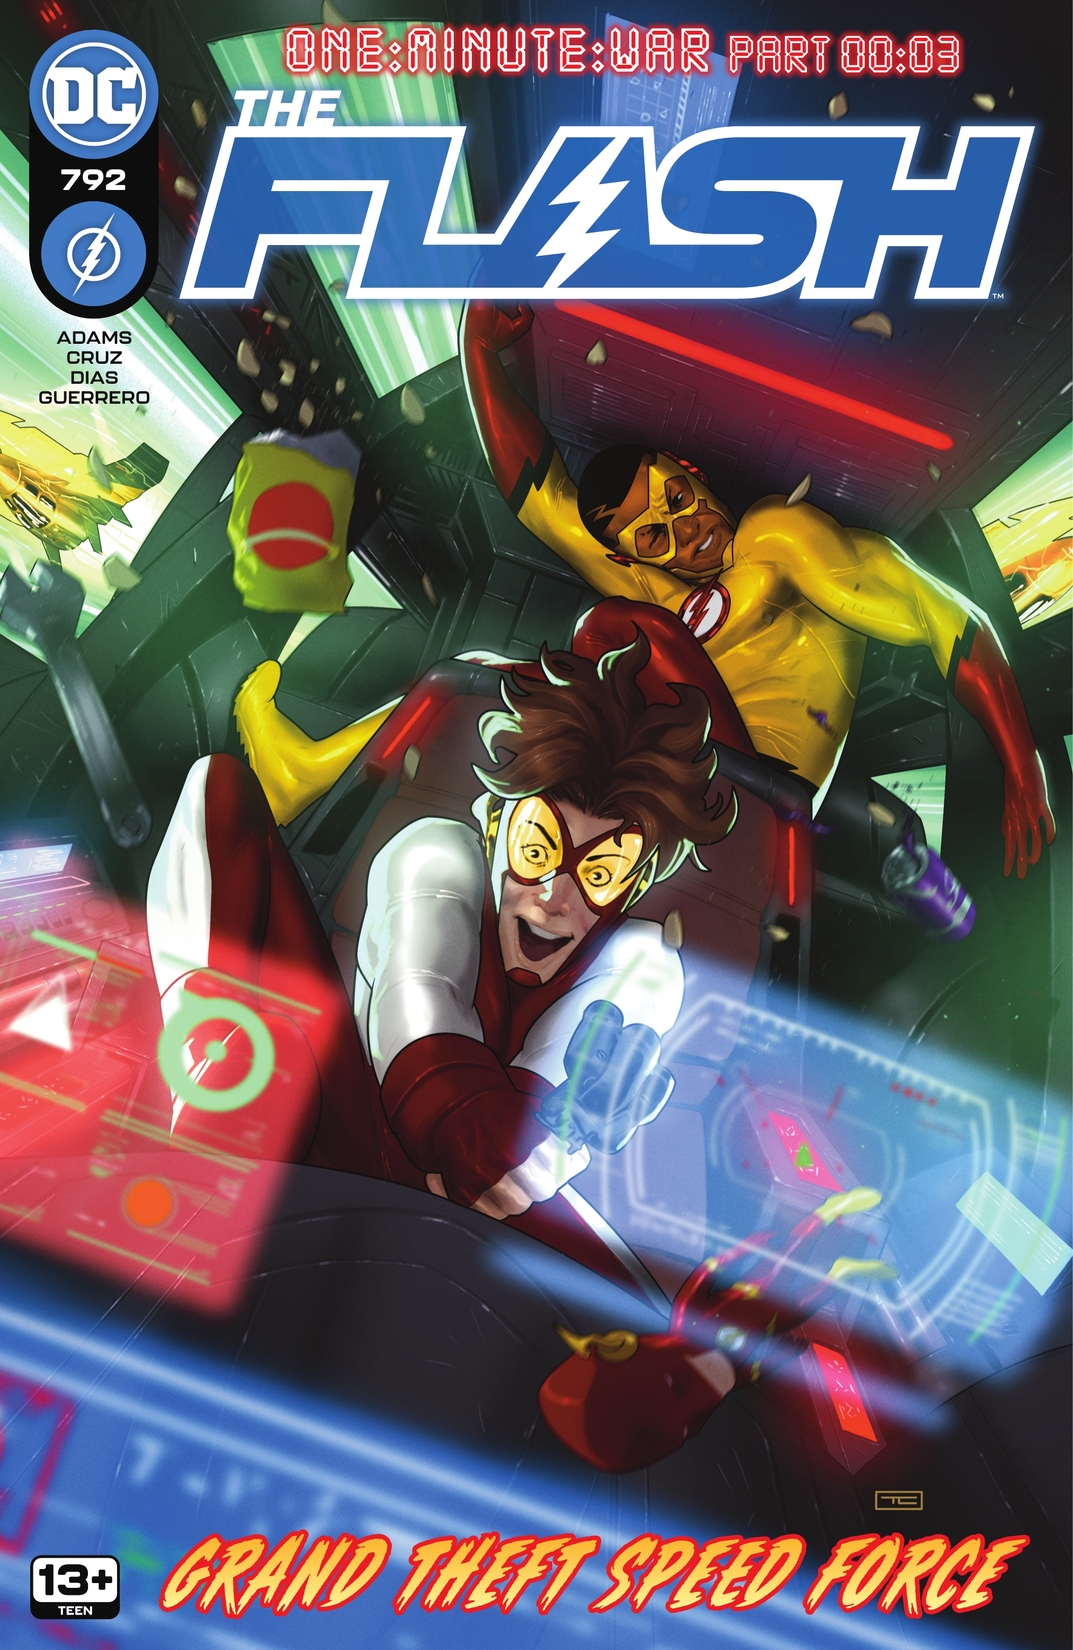 The Flash (2016-) #792 preview images